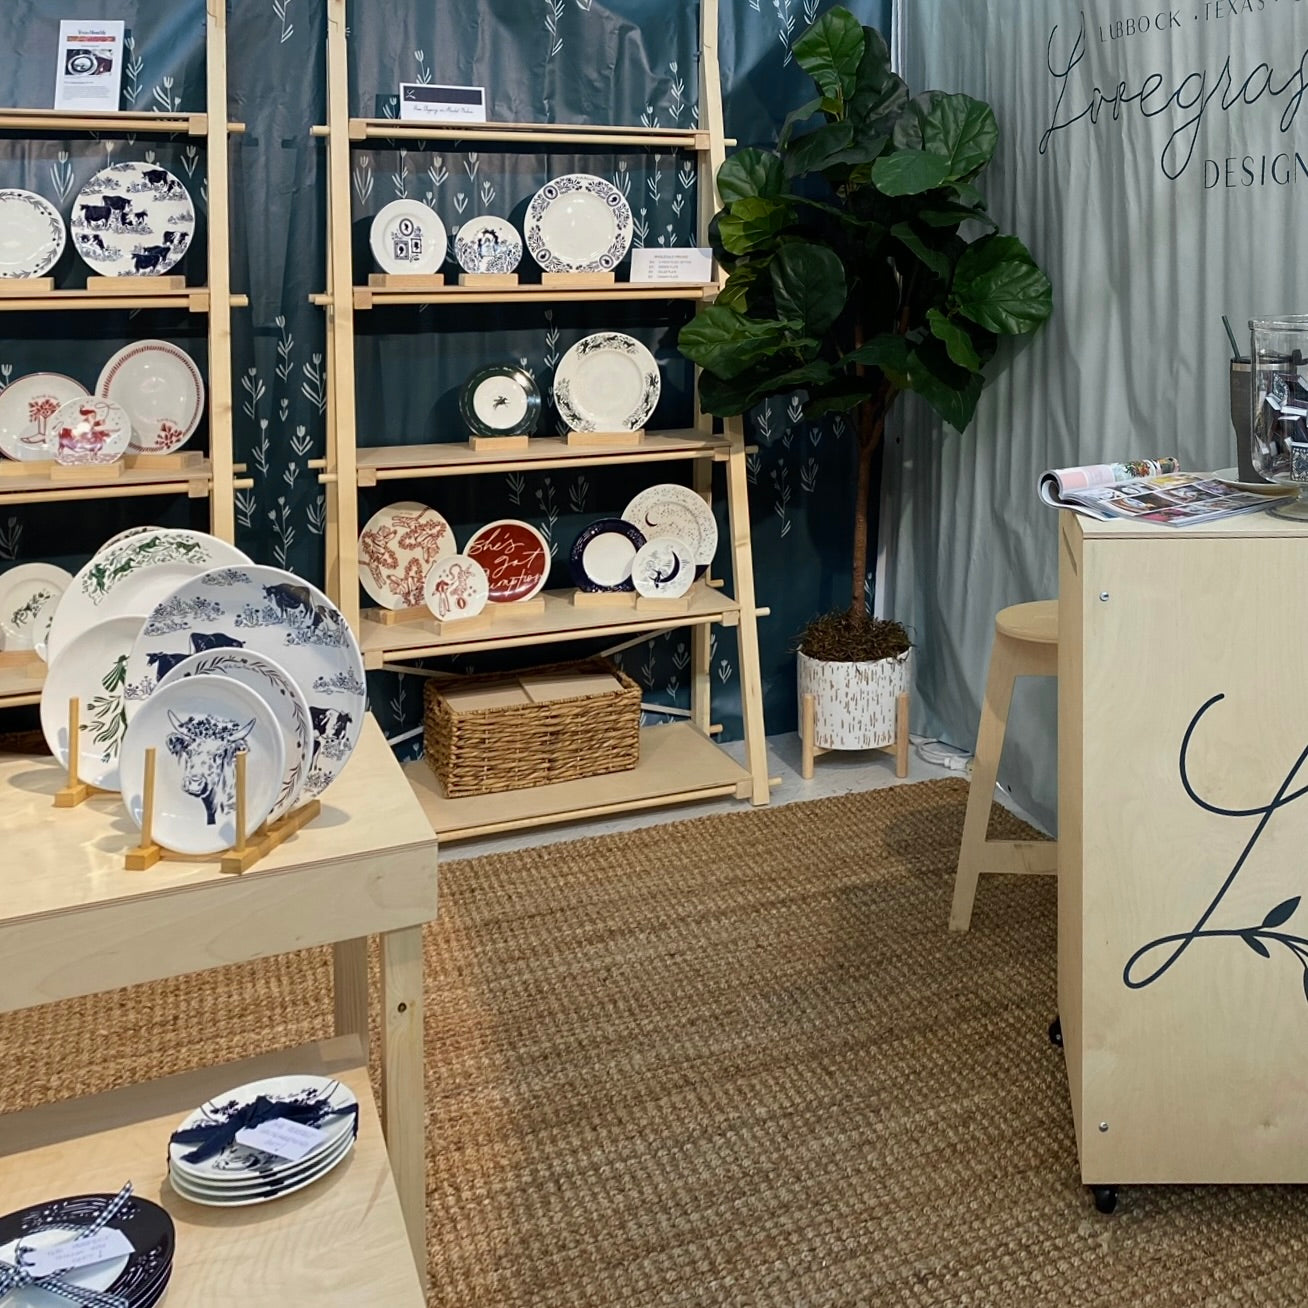 Lovegrass Desings pop up host stand by Milimetry